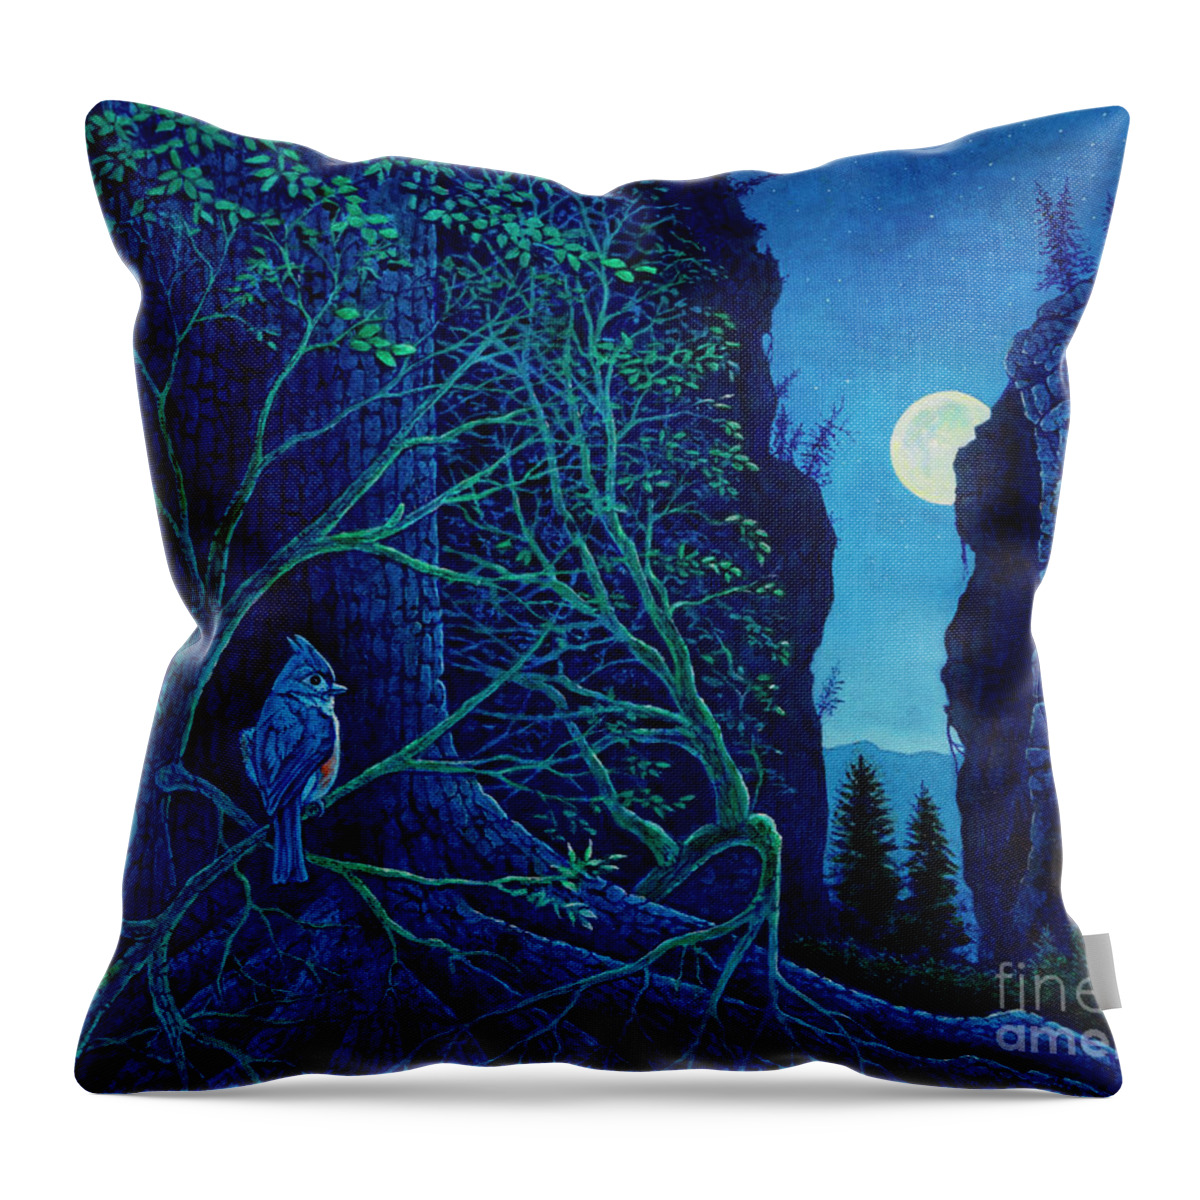 Bird Throw Pillow featuring the painting Bluejay by Michael Frank